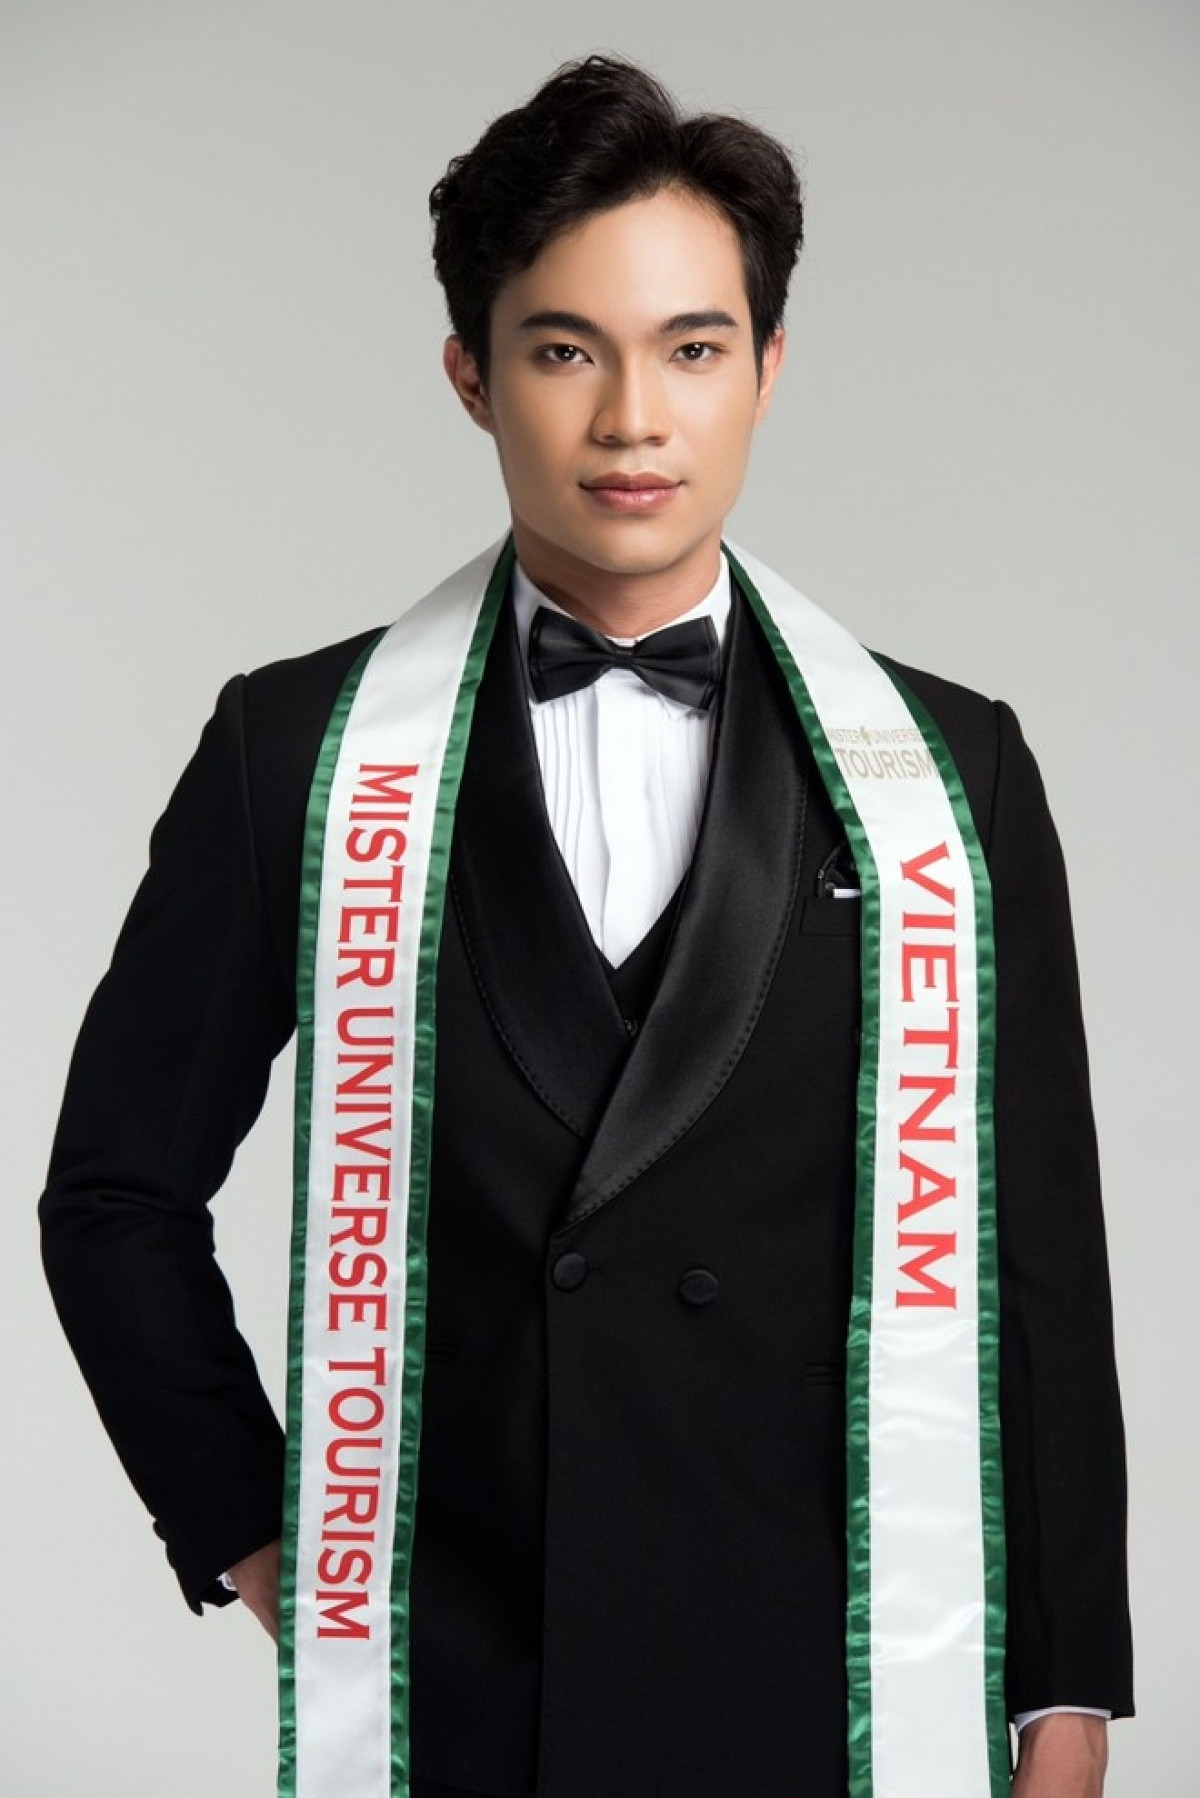 local doctor to compete at mister universe tourism 2023 picture 1